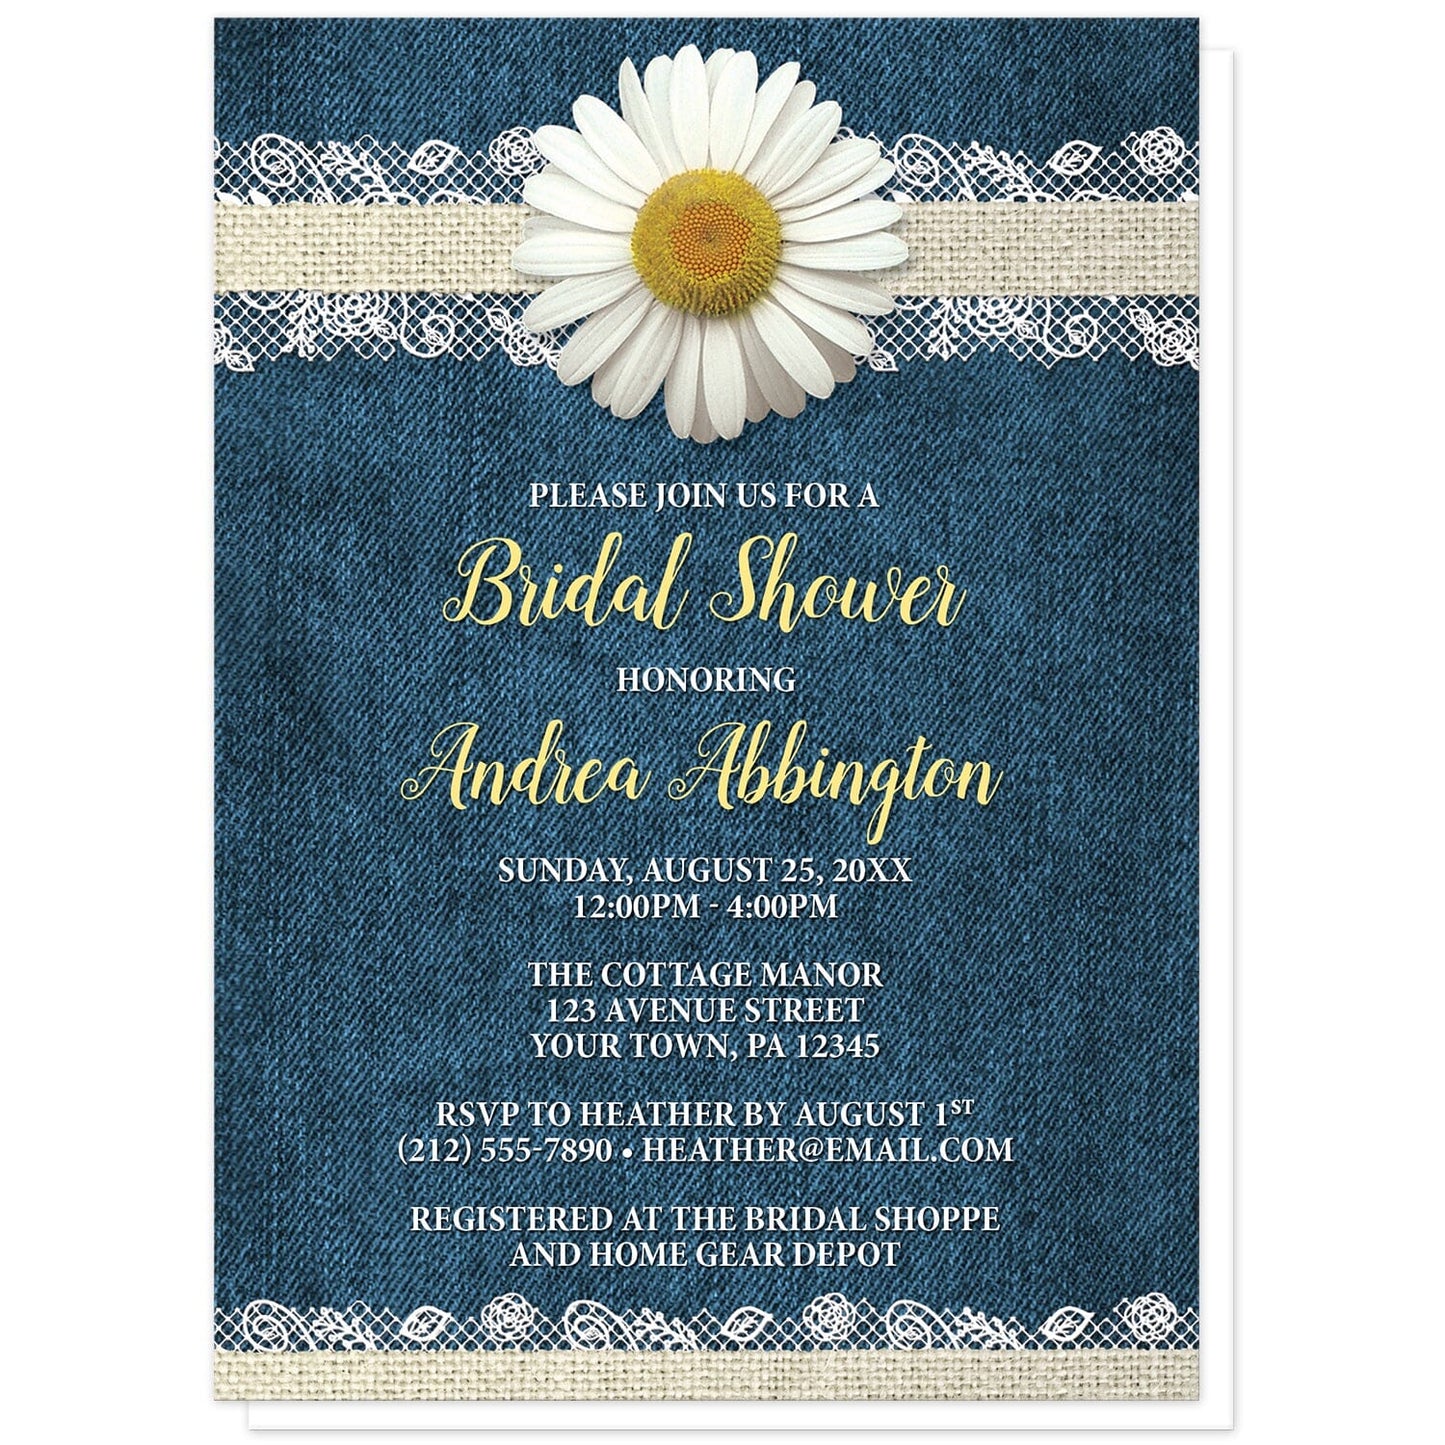 Daisy Burlap and Lace Denim Bridal Shower Invitations at Artistically Invited. Southern rustic daisy burlap and lace denim bridal shower invitations with a white daisy flower centered at the top on a burlap and lace ribbon strip illustration, over a country blue denim background. Your personalized bridal shower celebration details are custom printed in yellow and white over the denim design.